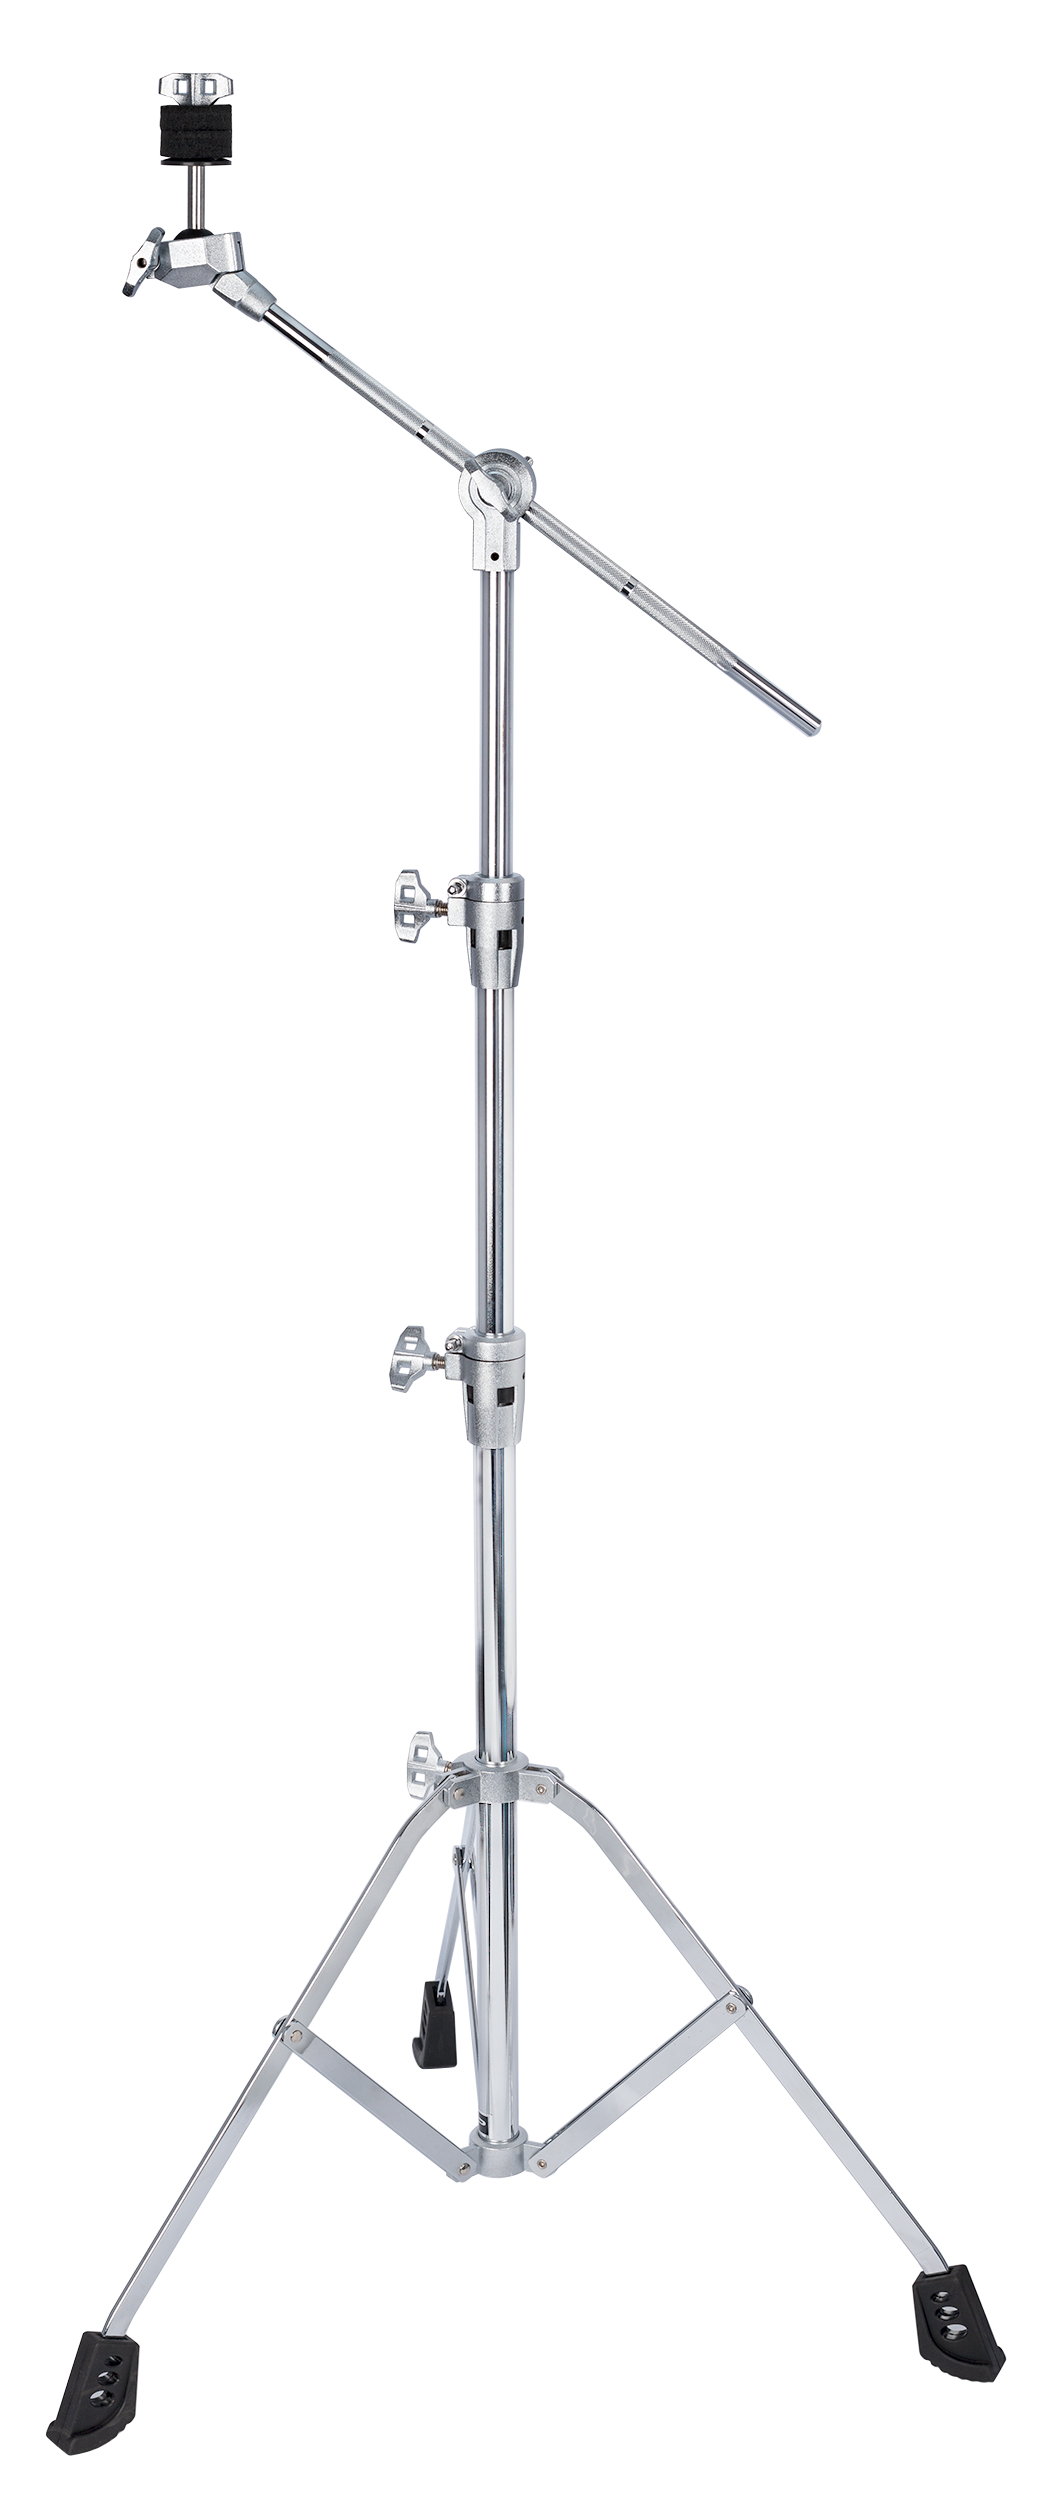 DXP DXPCB6 650 Series Boom/Straight Cymbal Stand